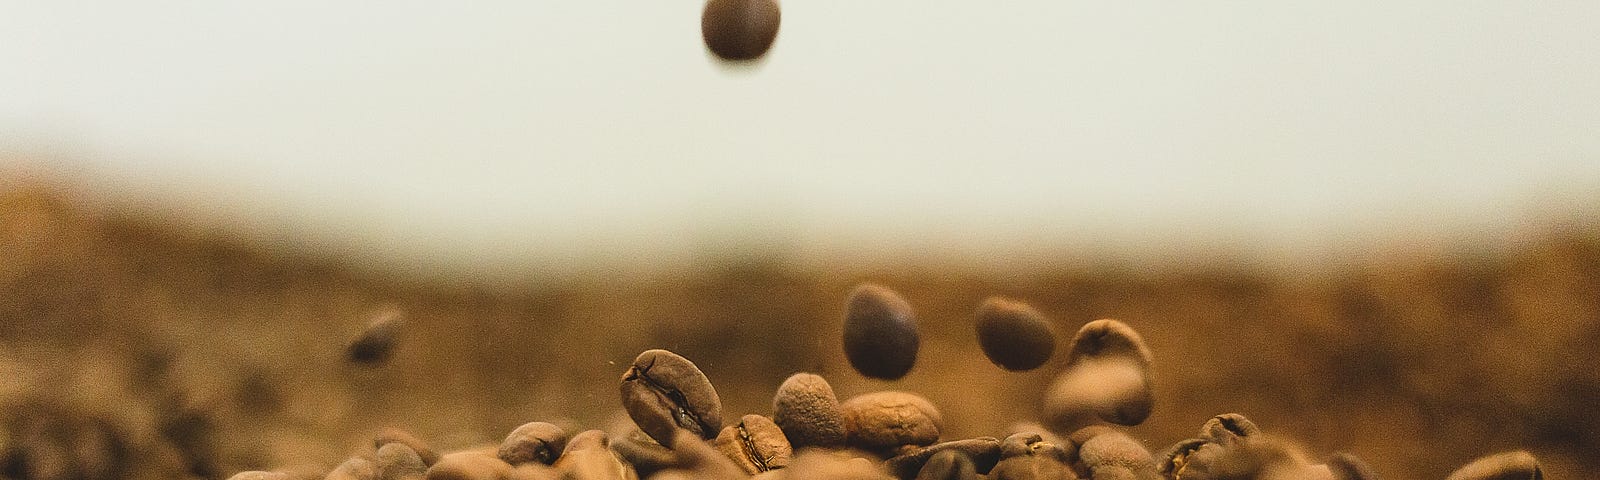 Brown coffee beans drop from above into a pile on the ground. Close-up image, partially blurred. MIXING ALCOHOL AND A HIGH-CAFFEINE ENERGY DRINK is popular among younger adults. Unfortunately, this drink type can mask alcohol’s effects, facilitating over-drinking.